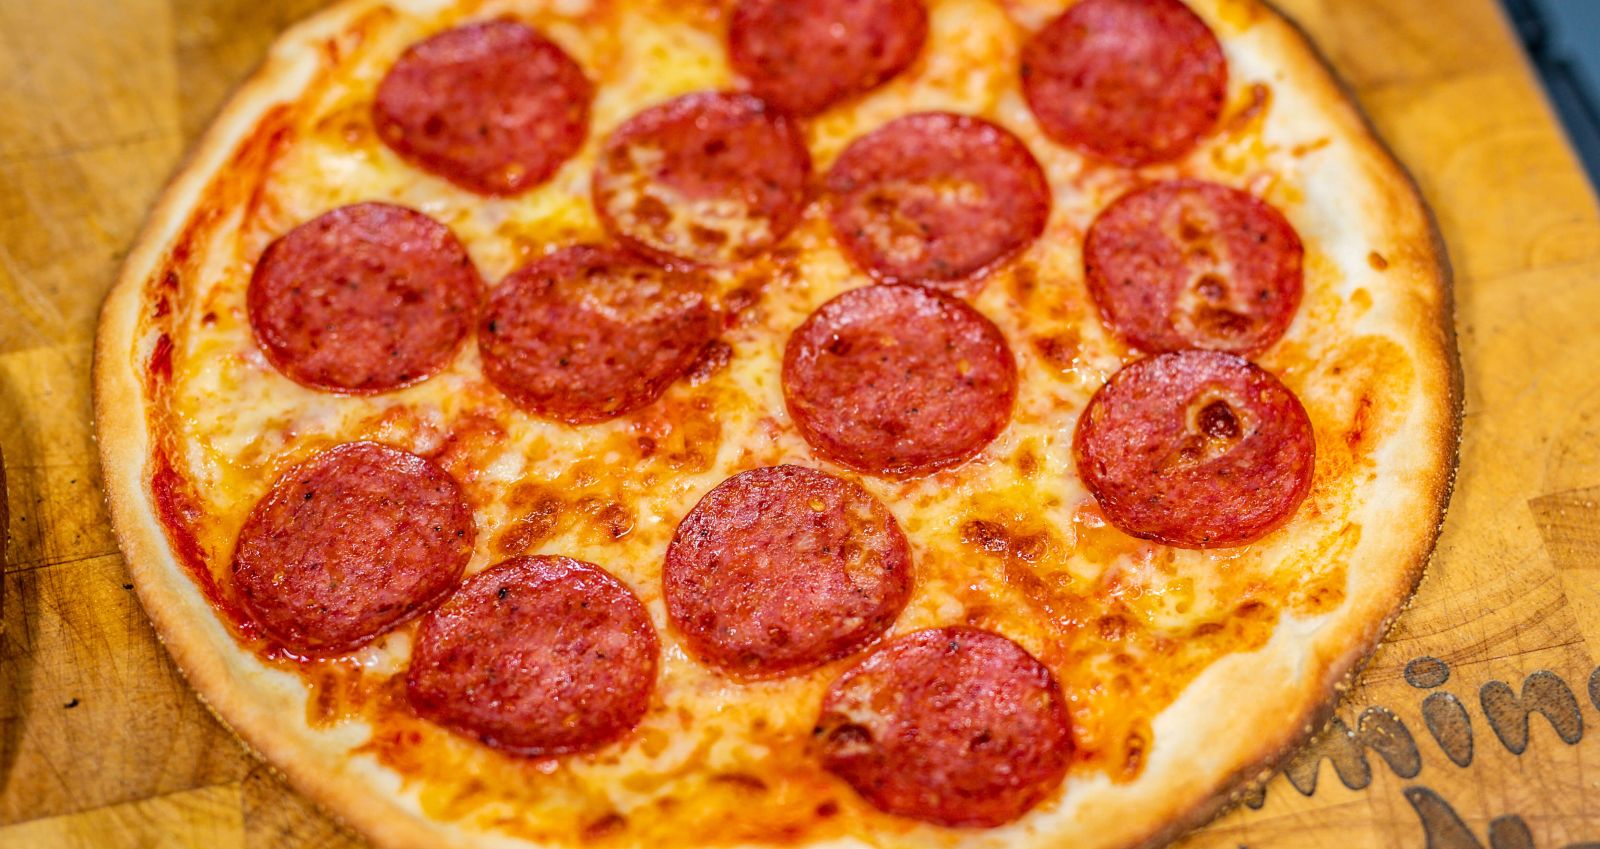 This image shows delicious Pepperoni Pizza